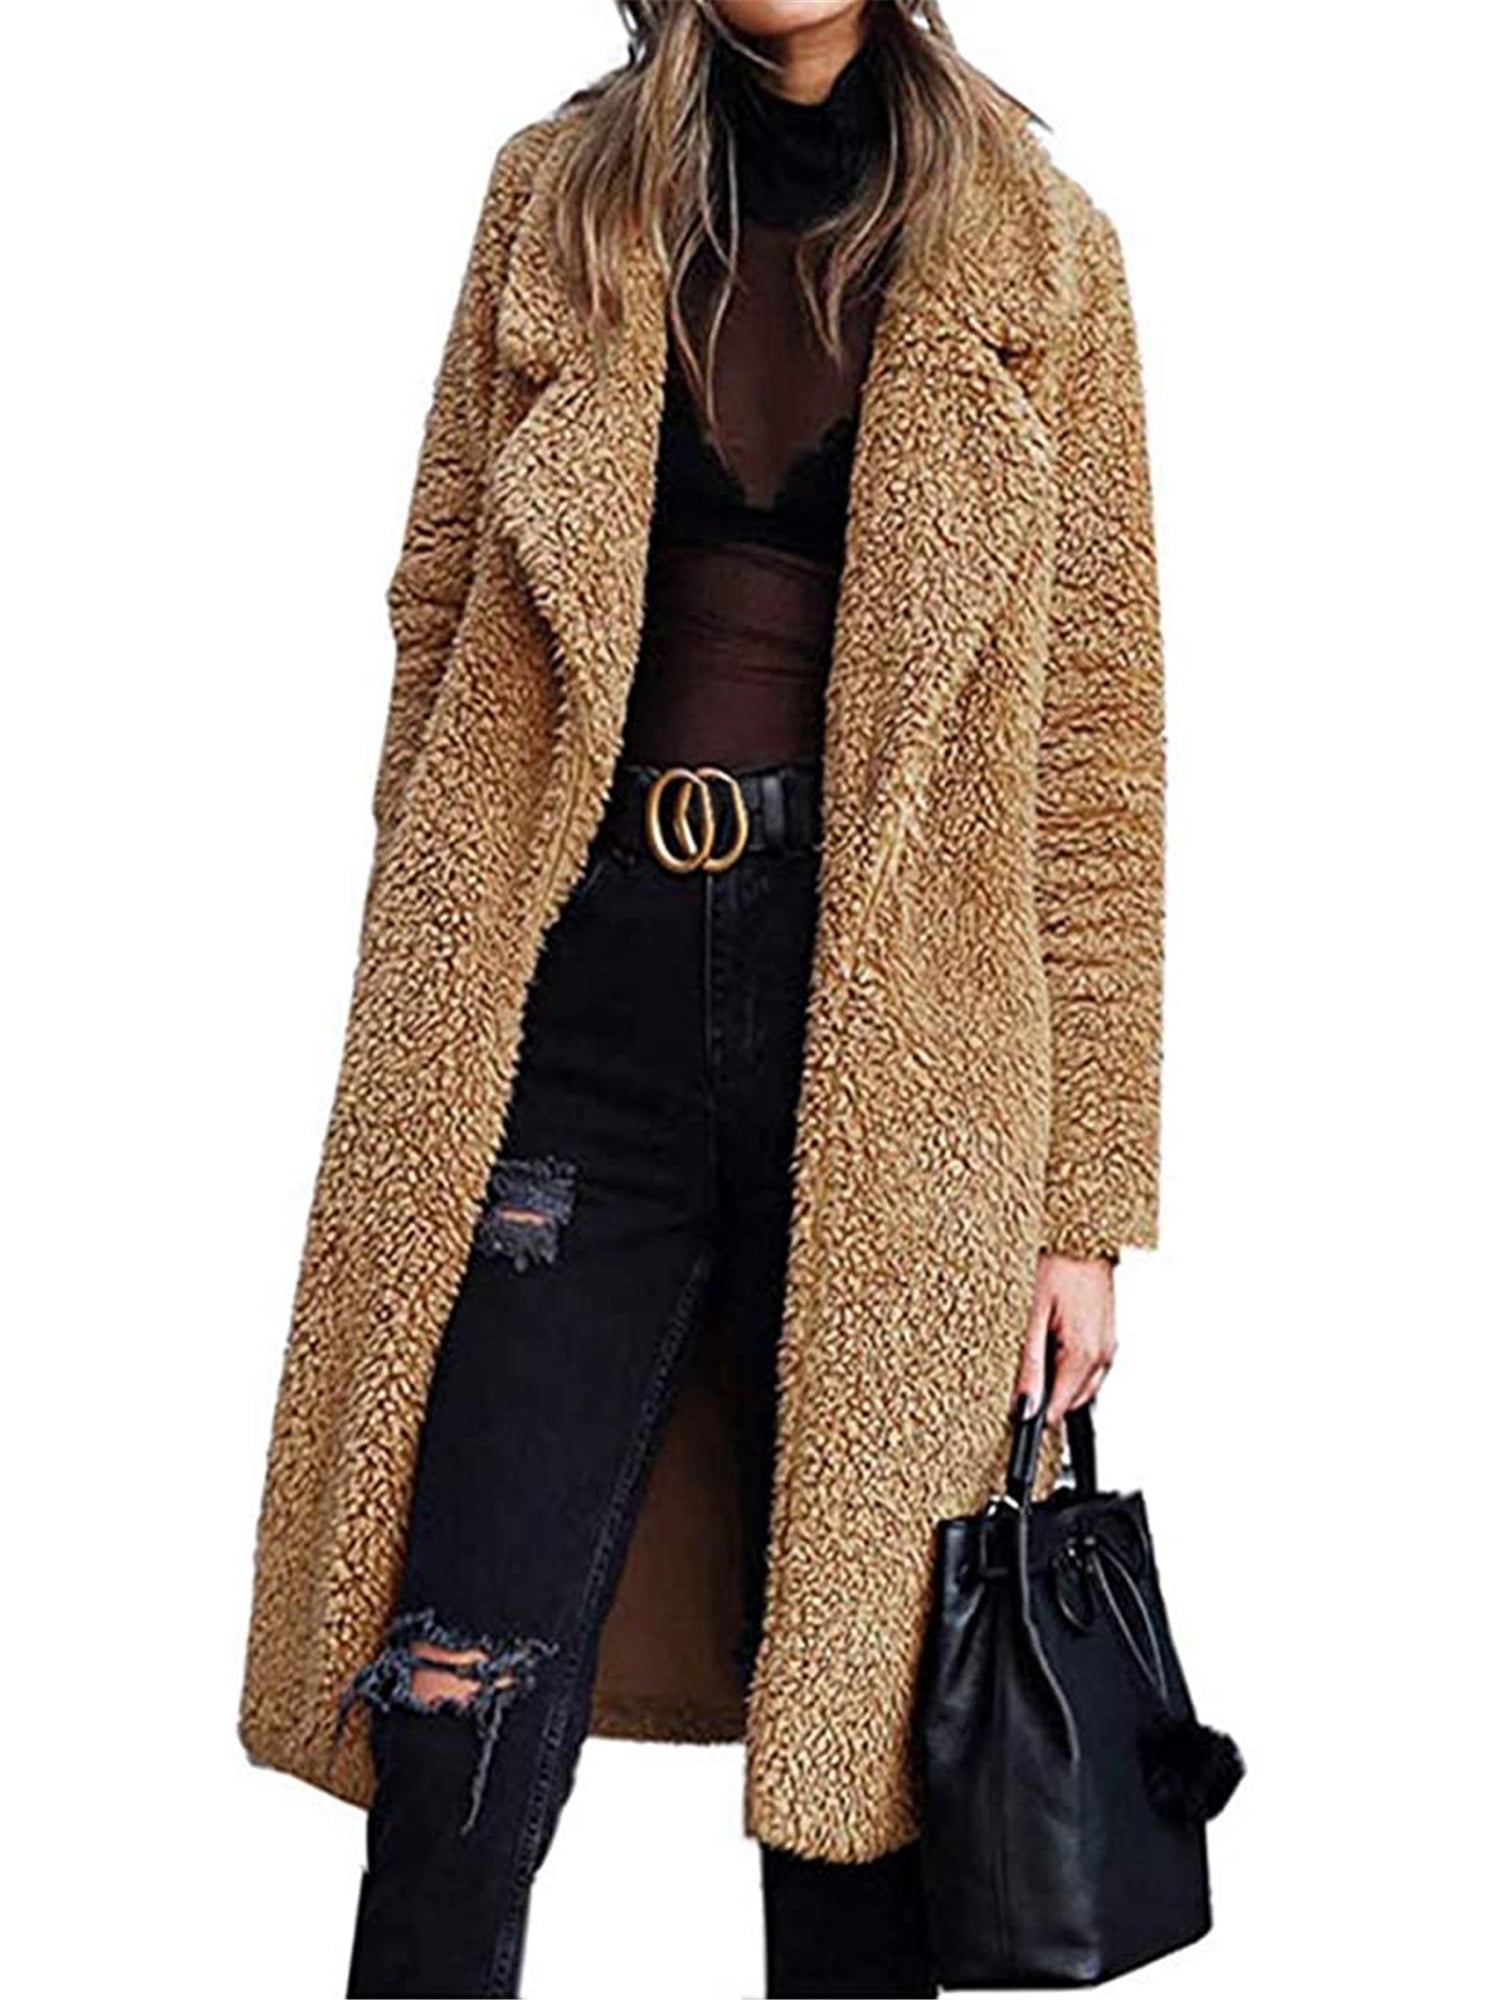 Molif Winter Long Sleeve Basic Outerwear Women Retro Hooded Ethnic Printed Faux Fluffy Warm Thicken Coat 